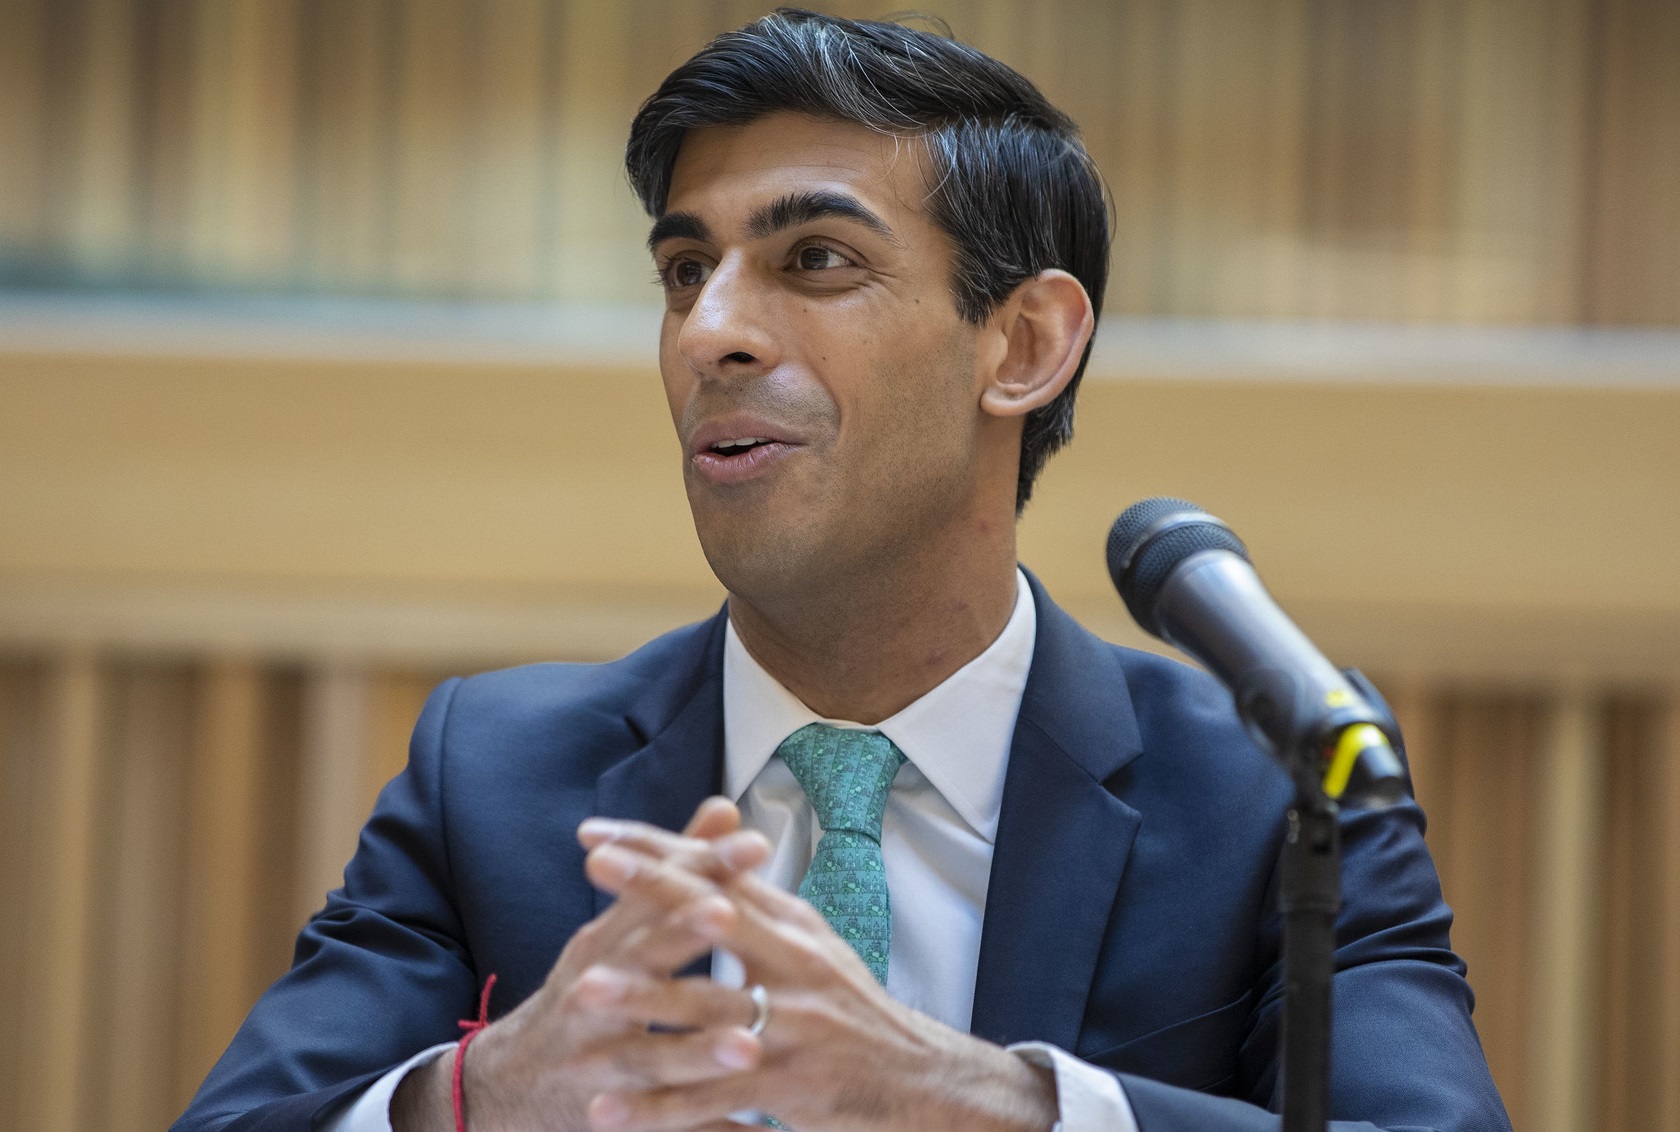 New Prime Minister Rishi Sunak Could be Good Bet for UK Gambling Industry